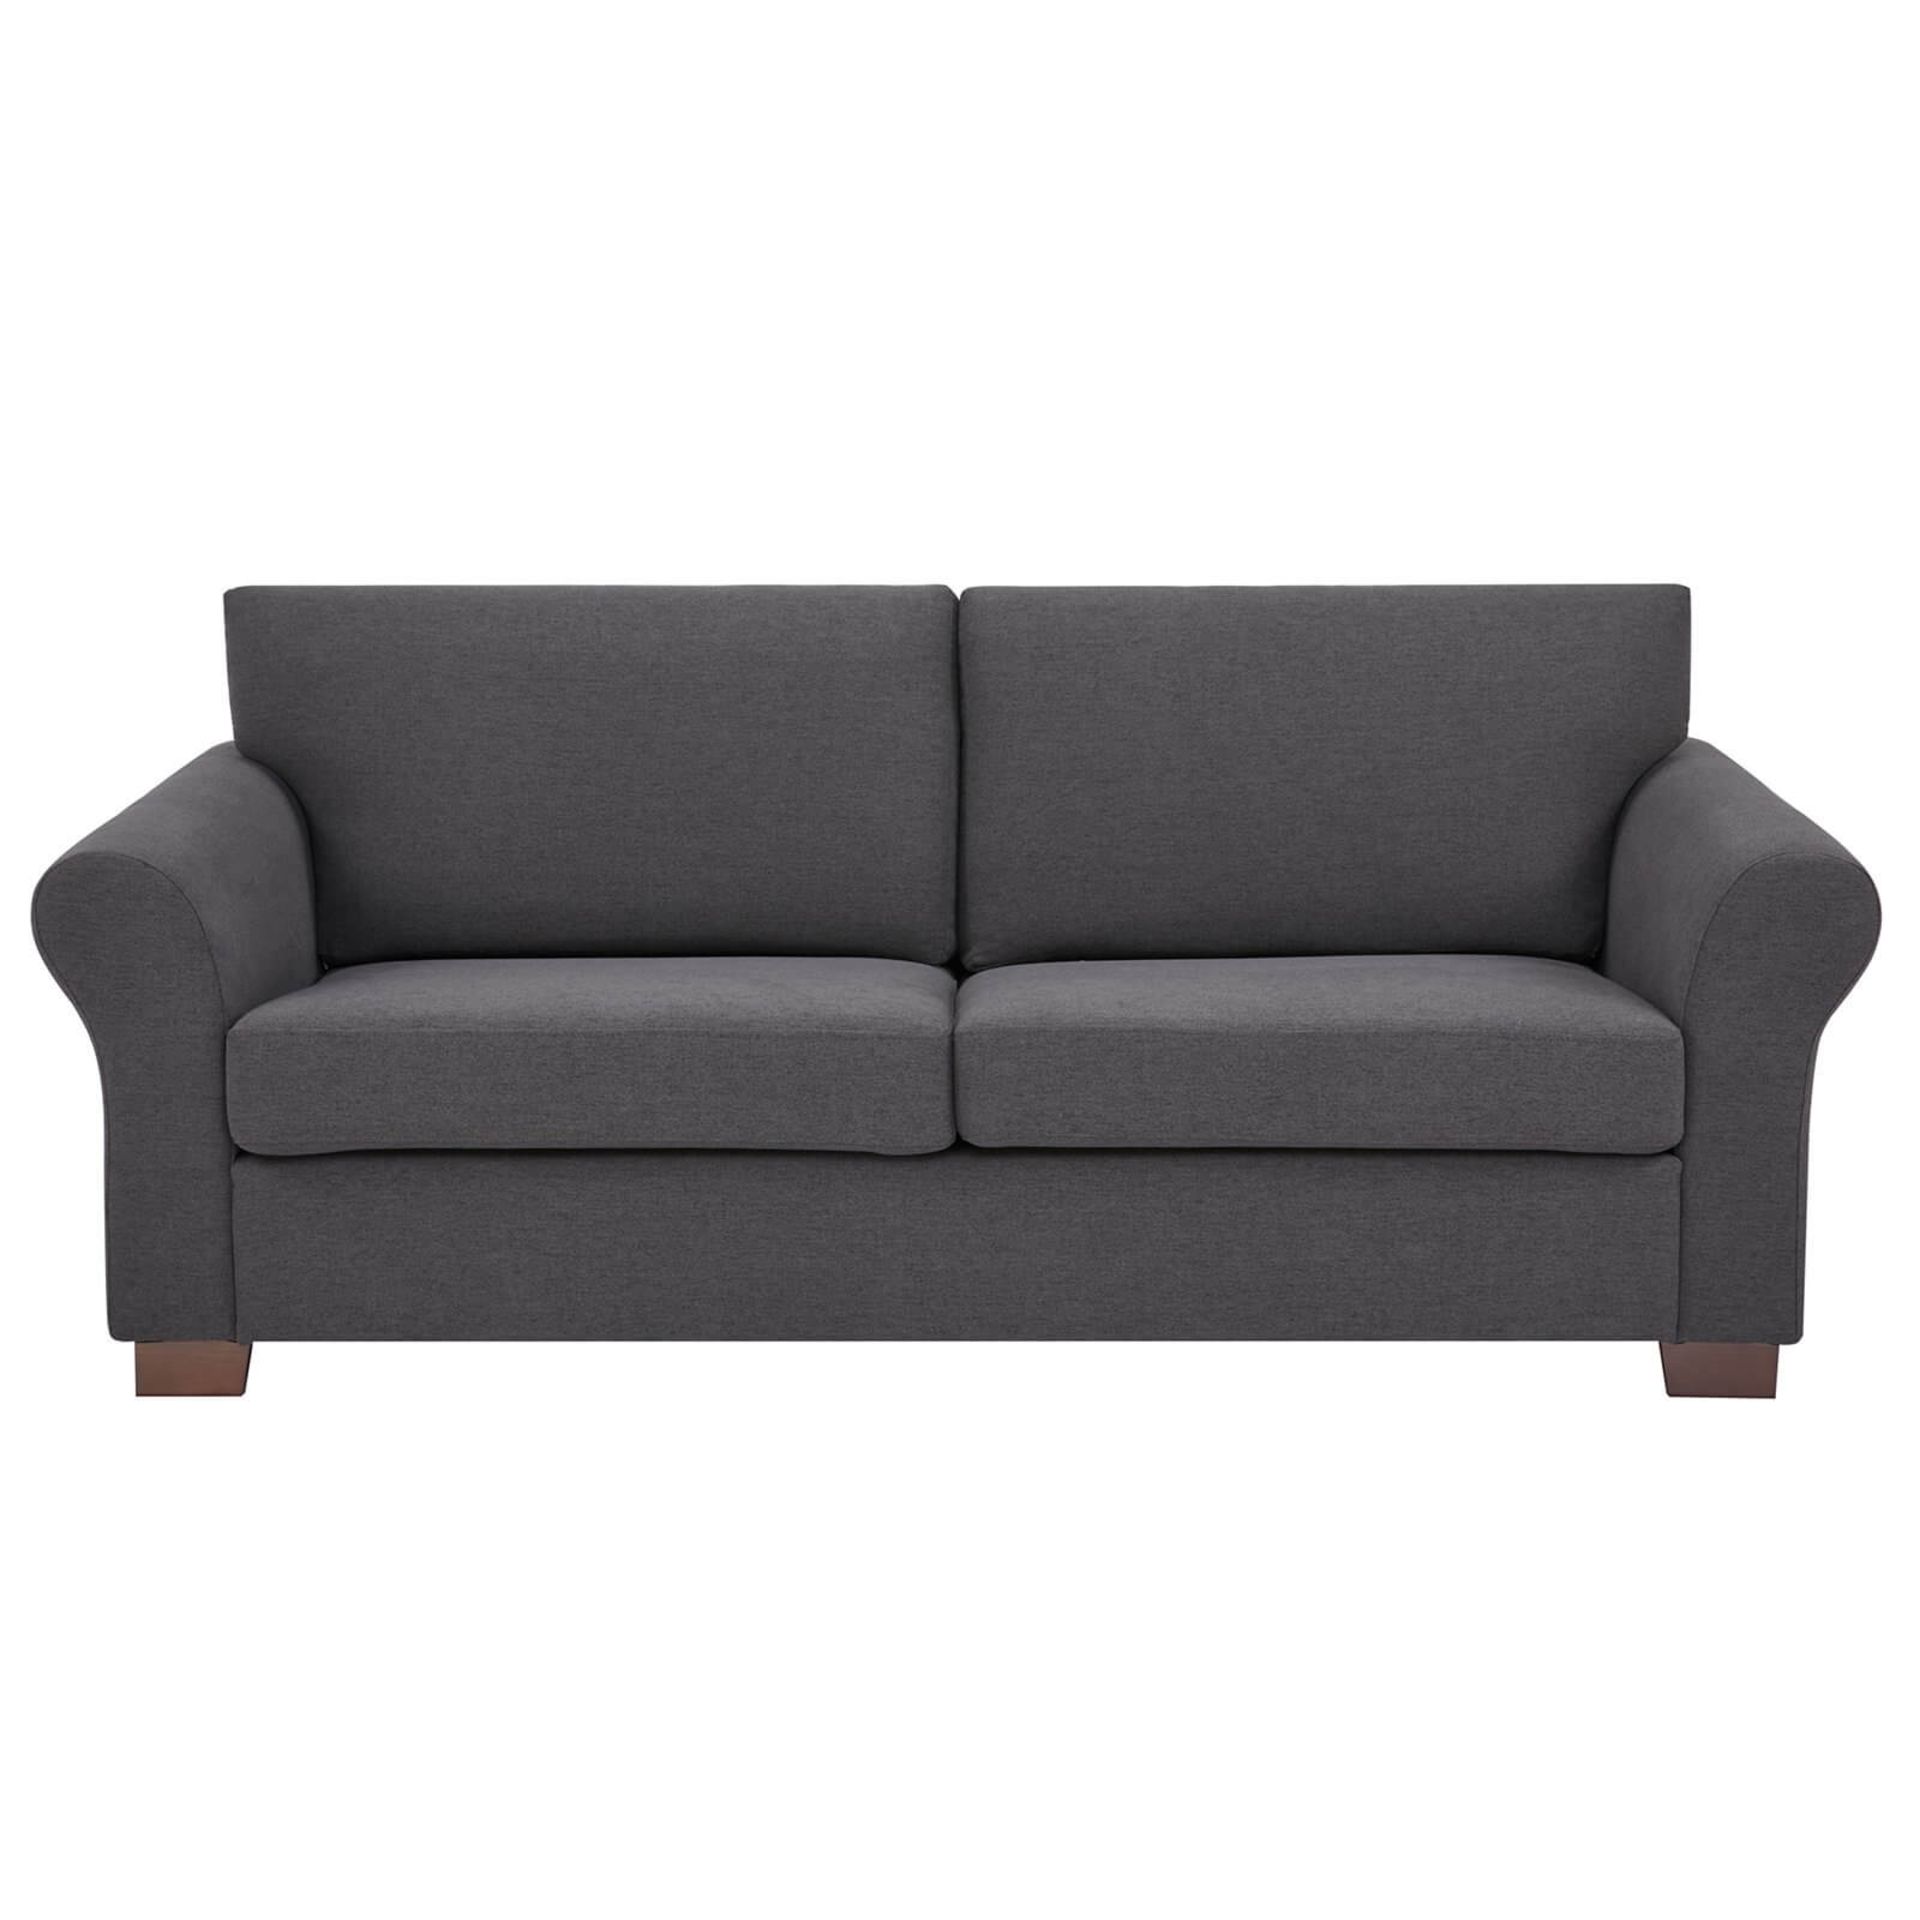 (R7P) 1 X Hayley Sofa Charcoal 3 Seater Sofa, Wooden Frame With Solid Beechwood Legs. 100% Polyest - Image 3 of 6